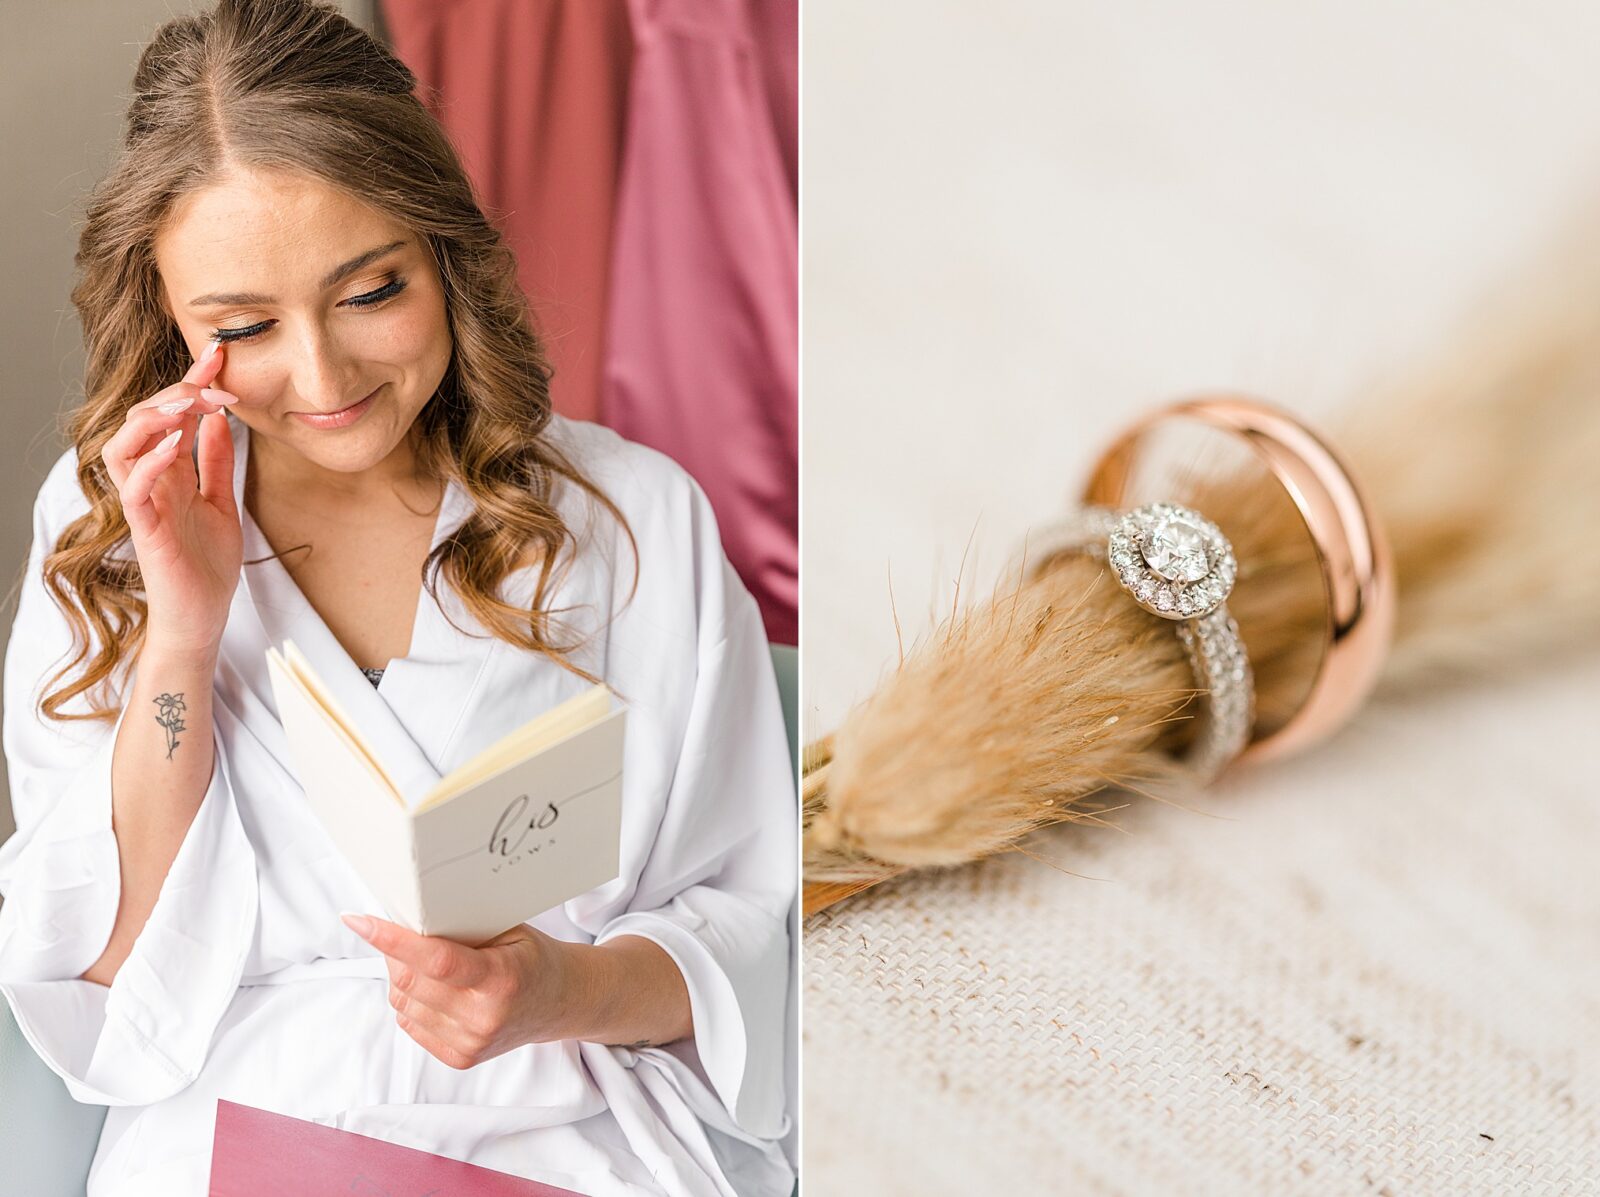 bride reading vow book, and wedding rings